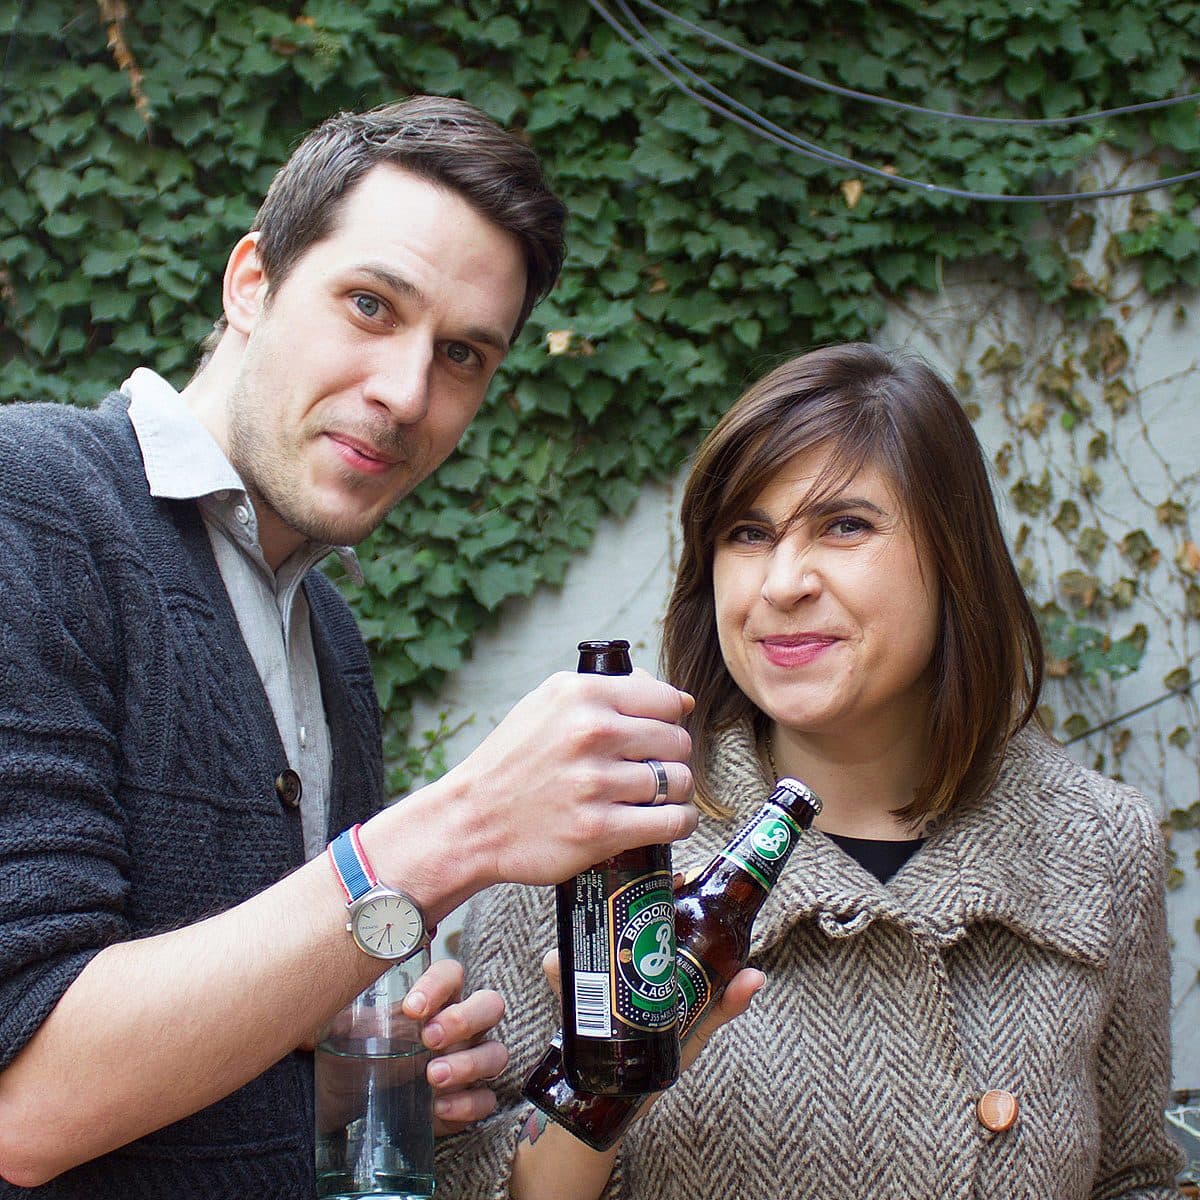 A man and a woman are standing outside in front of a wall covered in ivy. Both are holding bottles of lager, with the man holding an additional glass. The man is wearing a black sweater and a watch; the woman is wearing a brown coat. They are smiling at the camera.